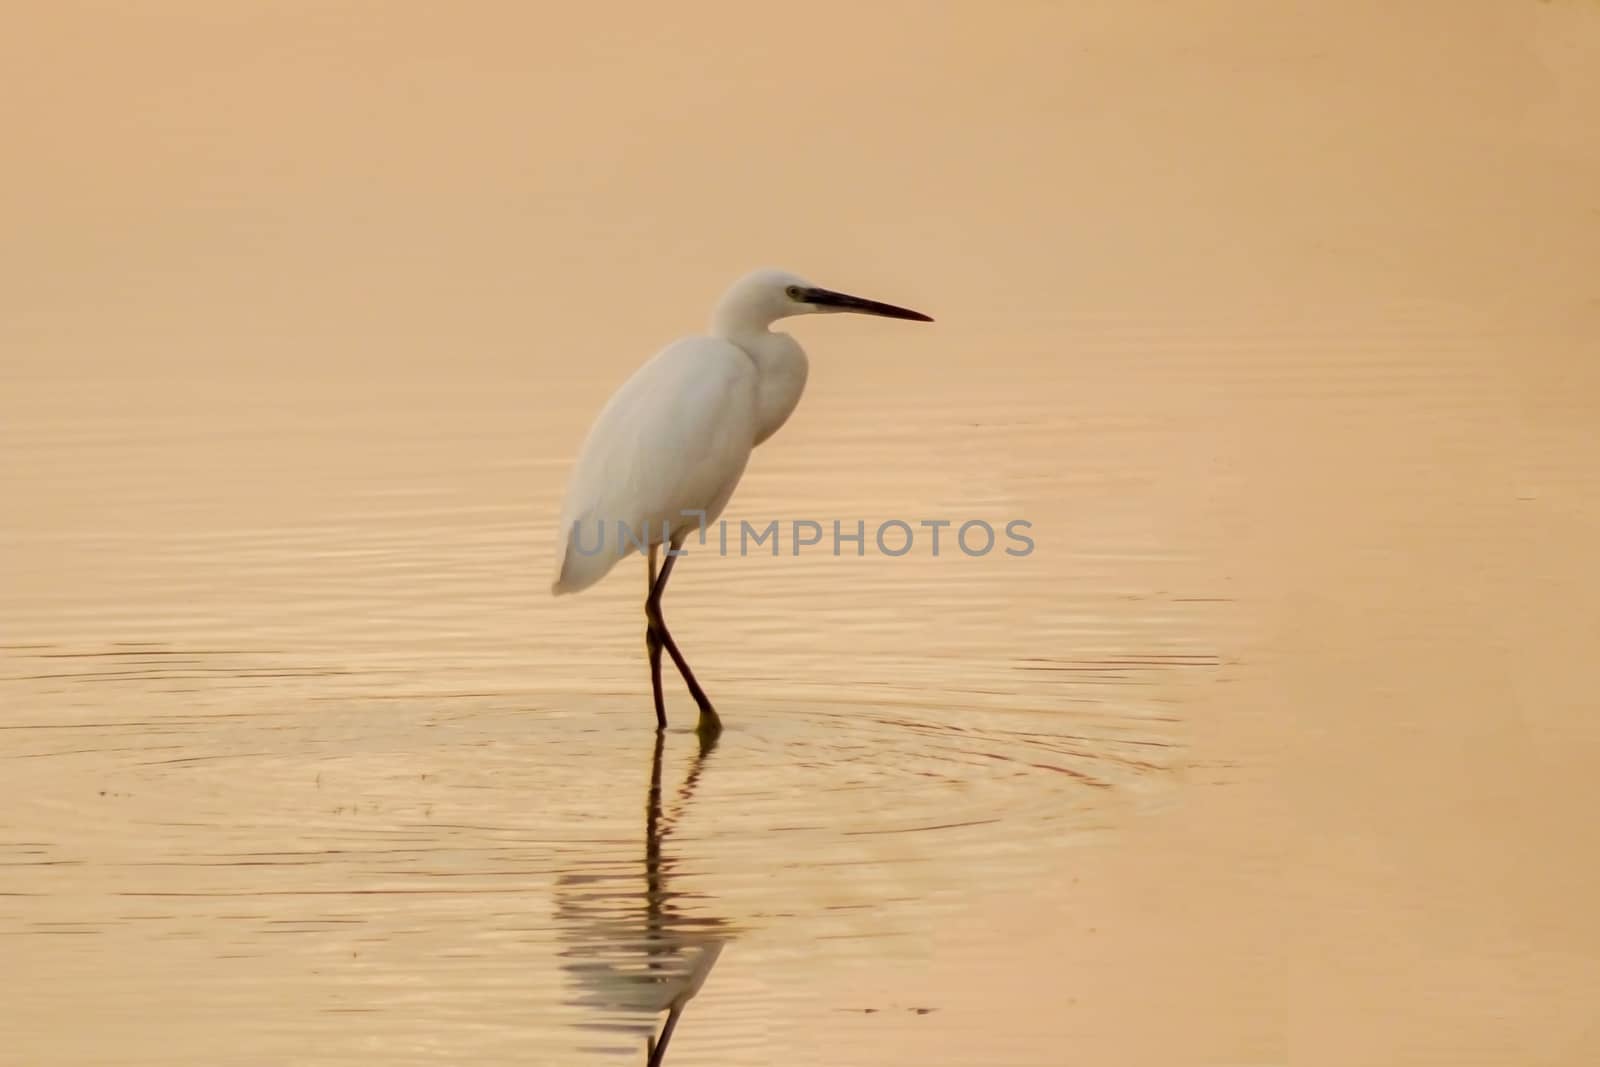 A white bird on top of the water by vicenfoto